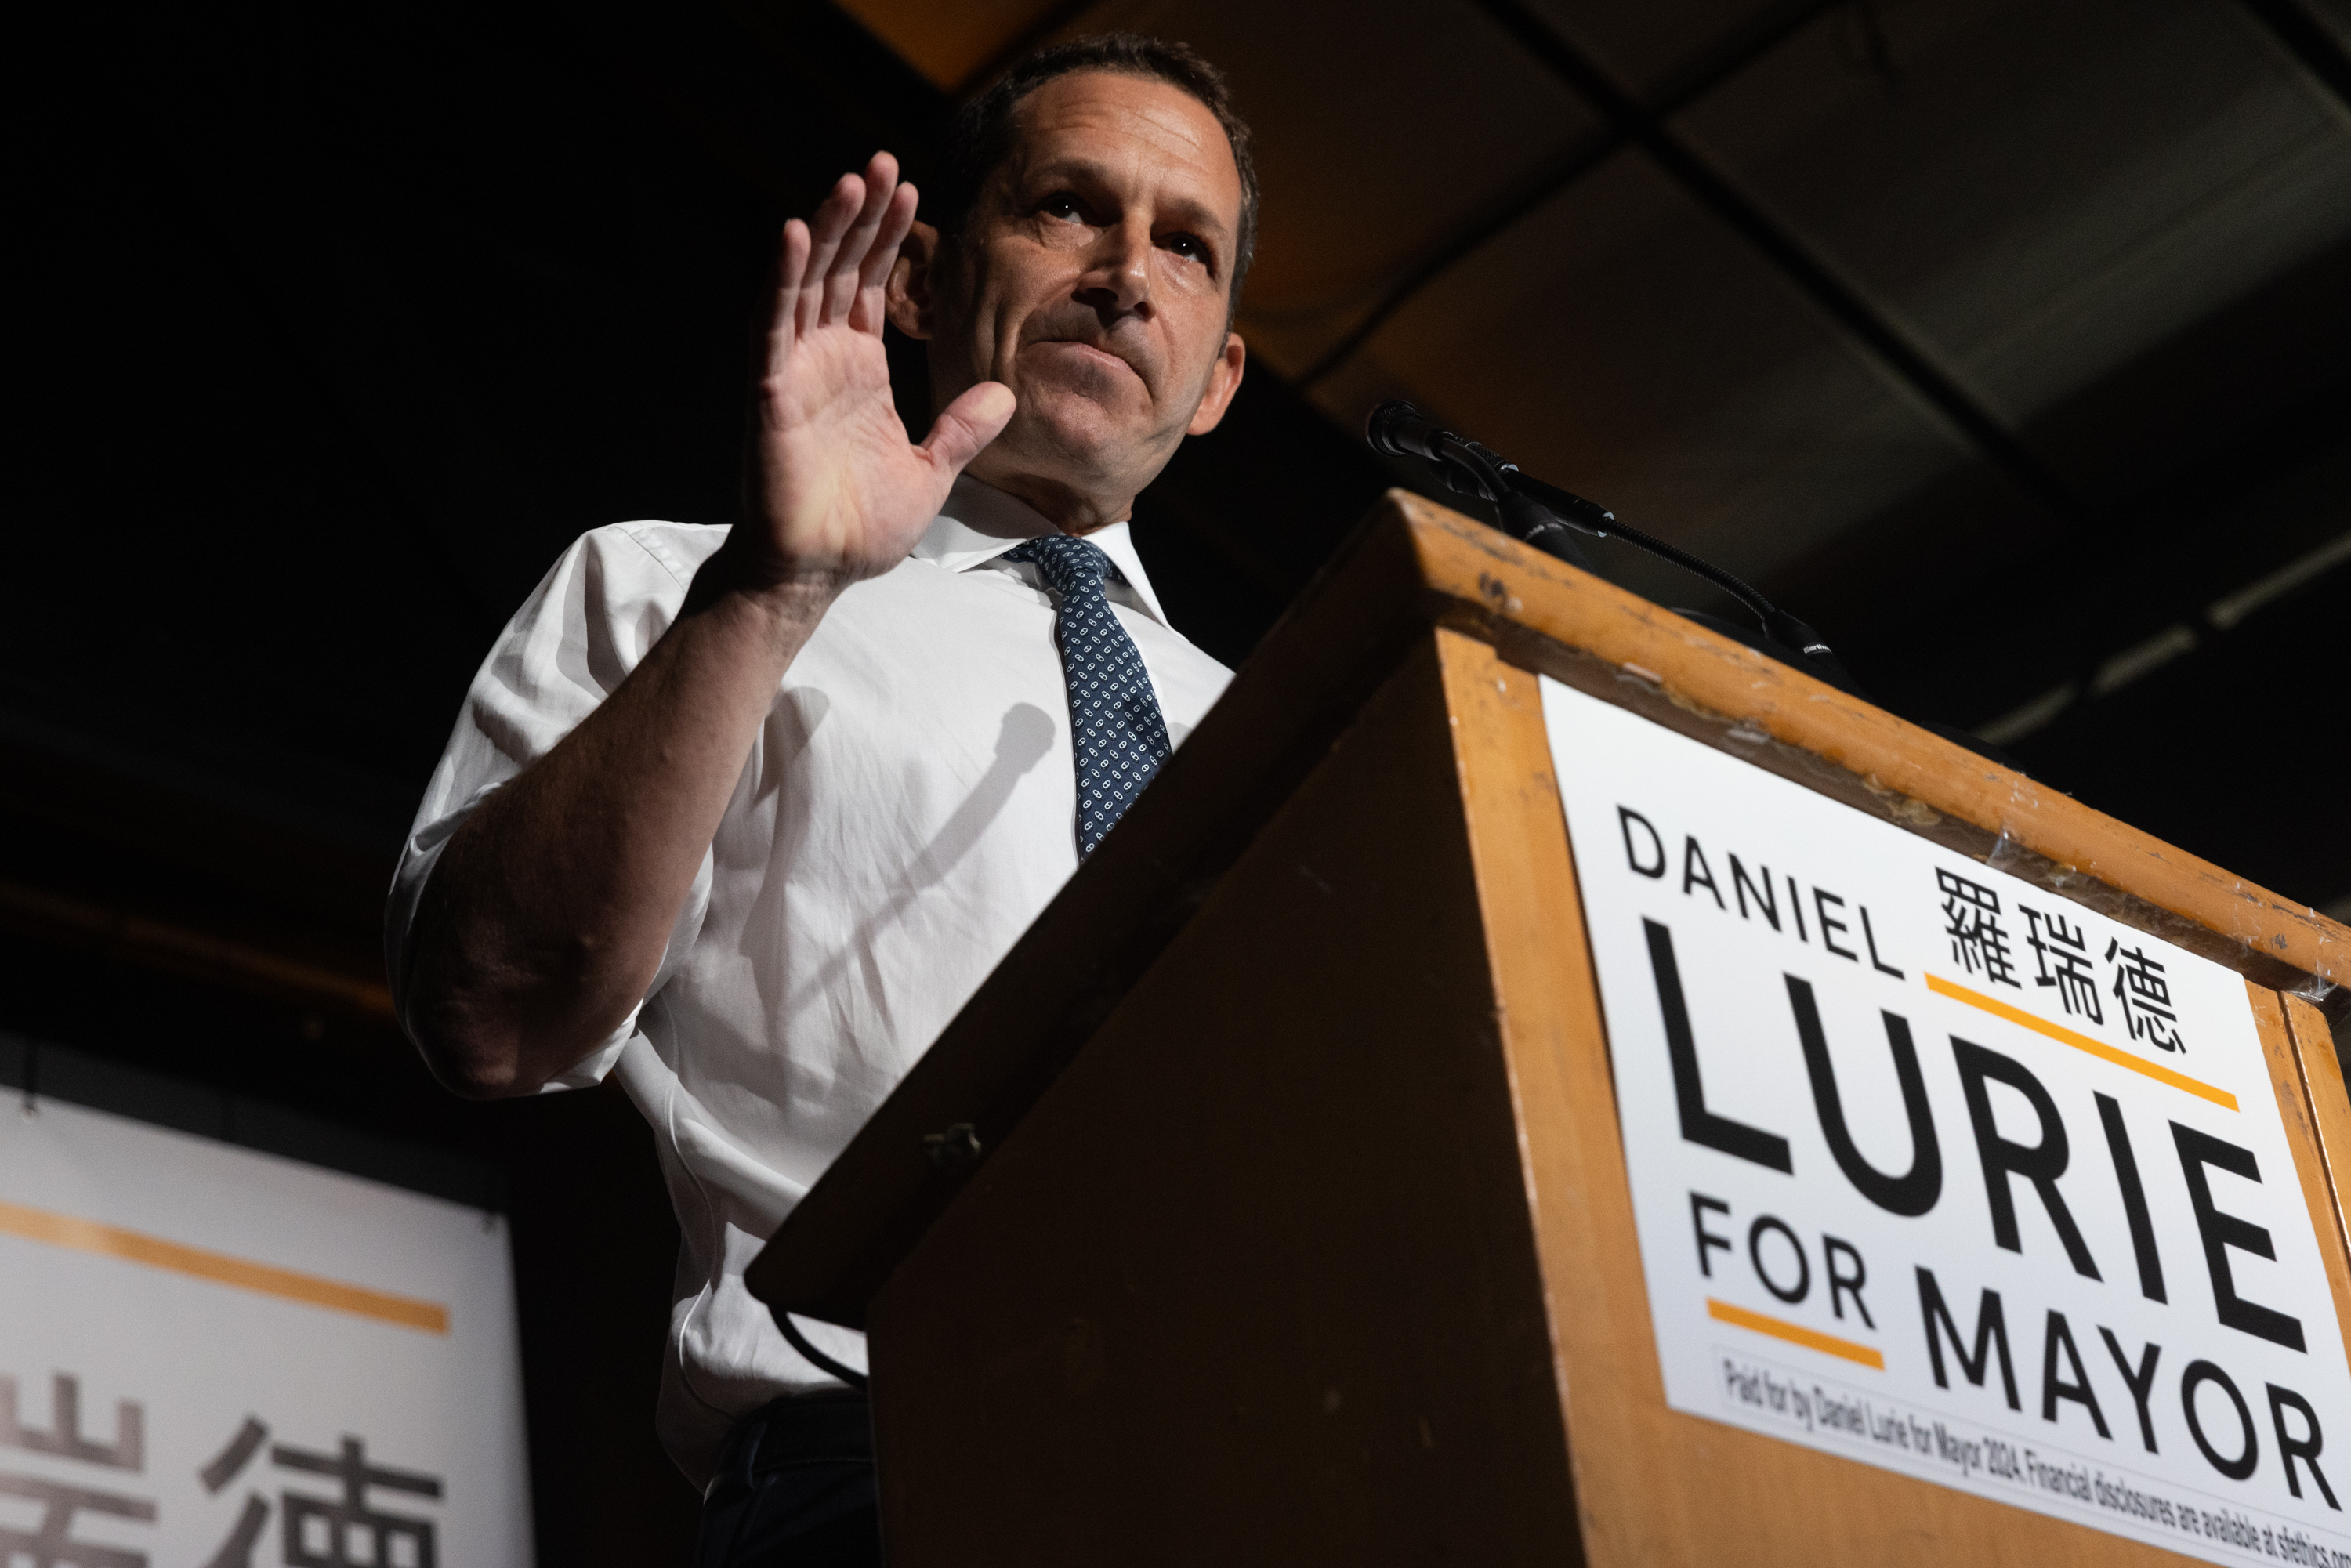 Daniel Lurie in a white shirt and tie speaks at a podium with a sign that reads &quot;Daniel Lurie for Mayor&quot; in English and Chinese characters.